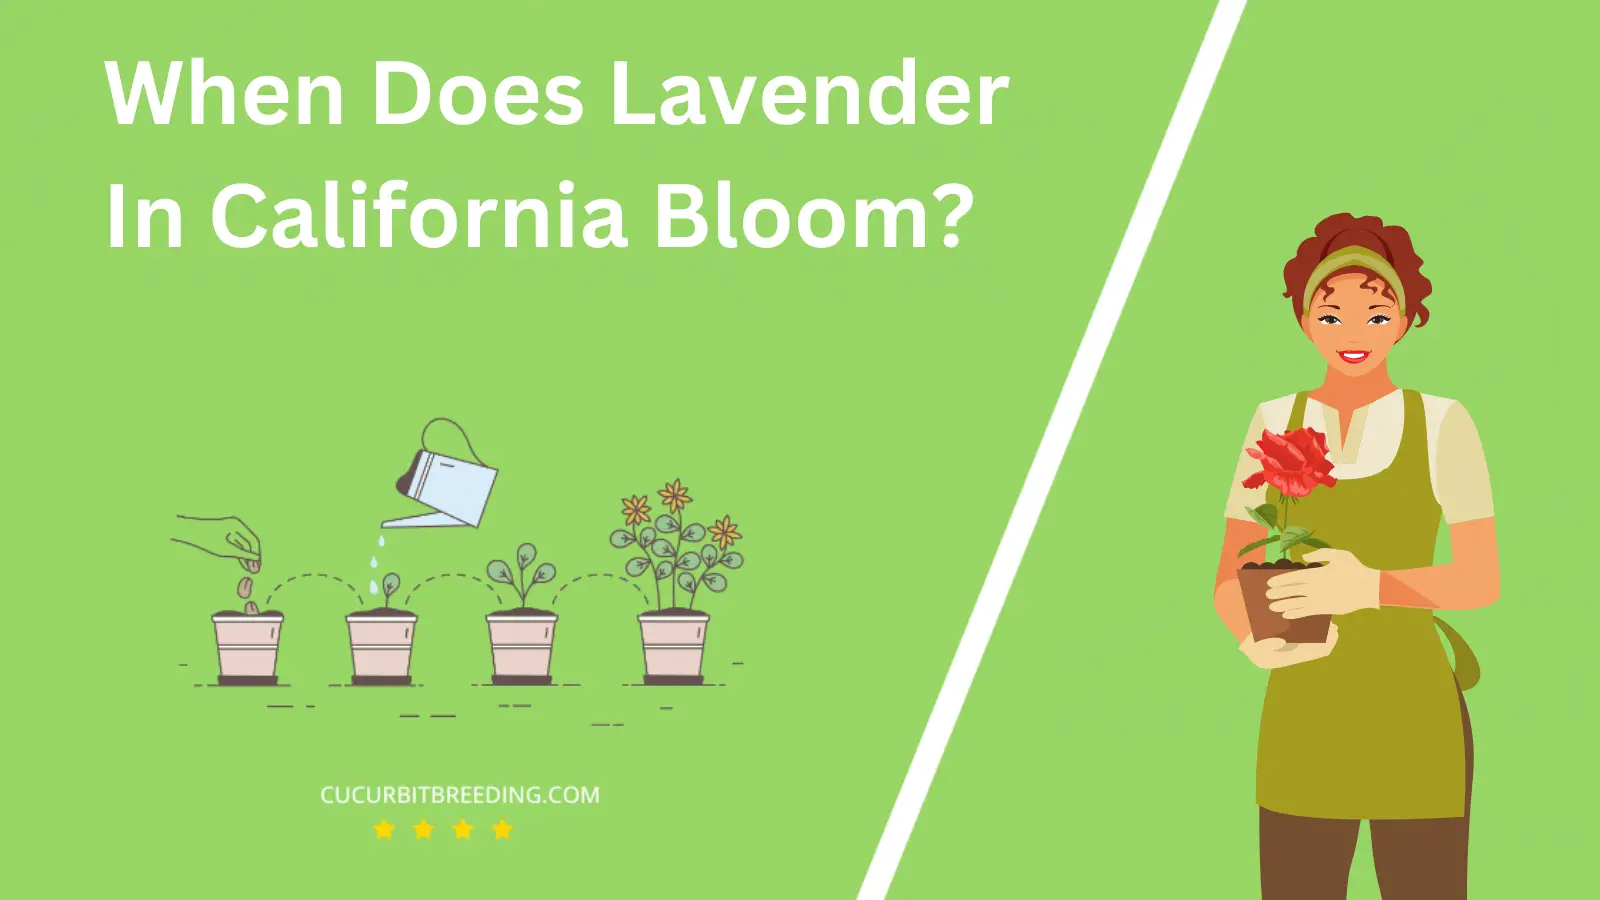 When Does Lavender In California Bloom?